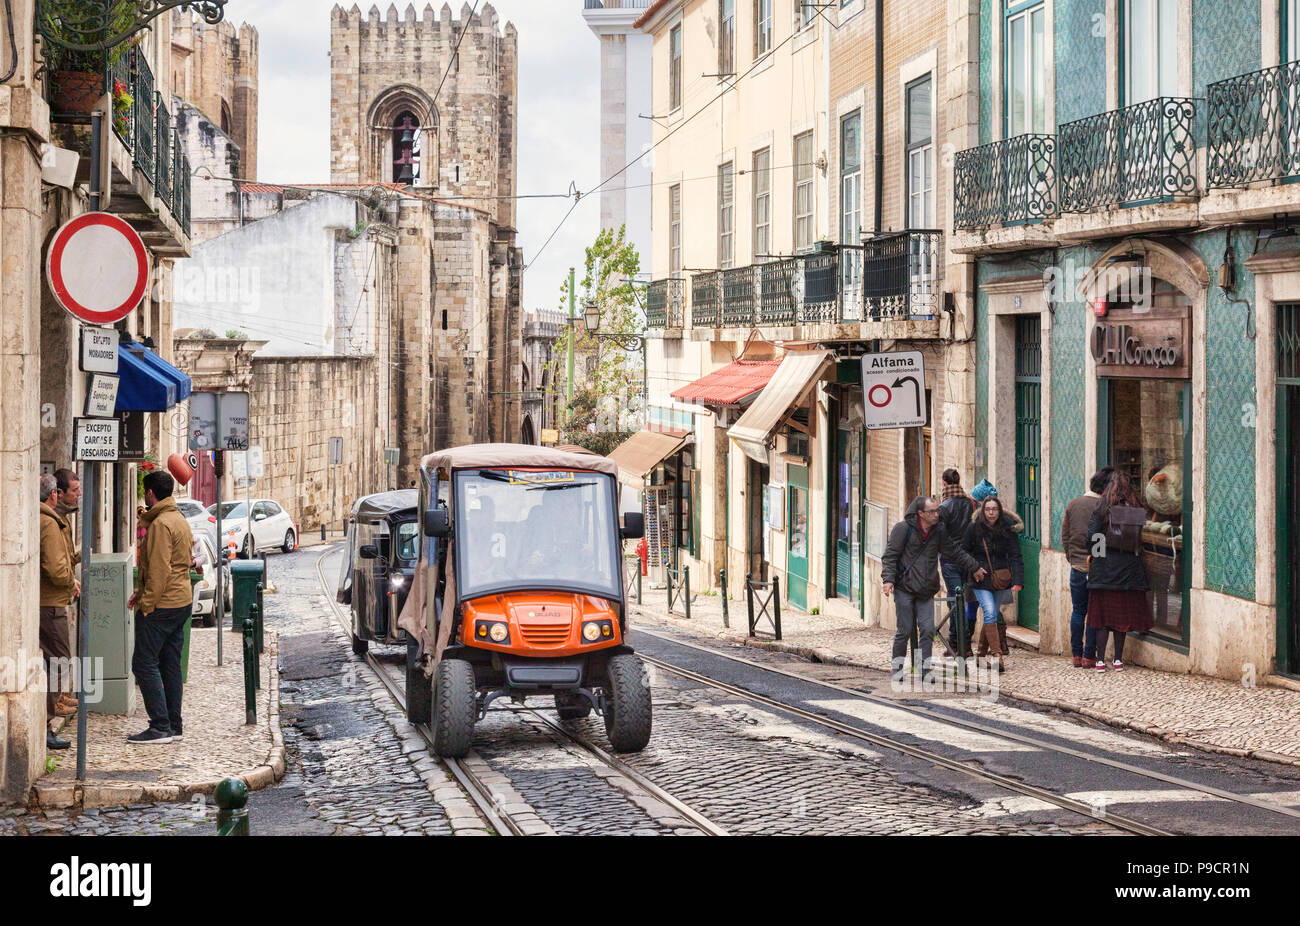 1 March 2018: Lisbon Portugal - 4X4 tuk tuk or quad bike on the streets of the Alfama District. Stock Photo